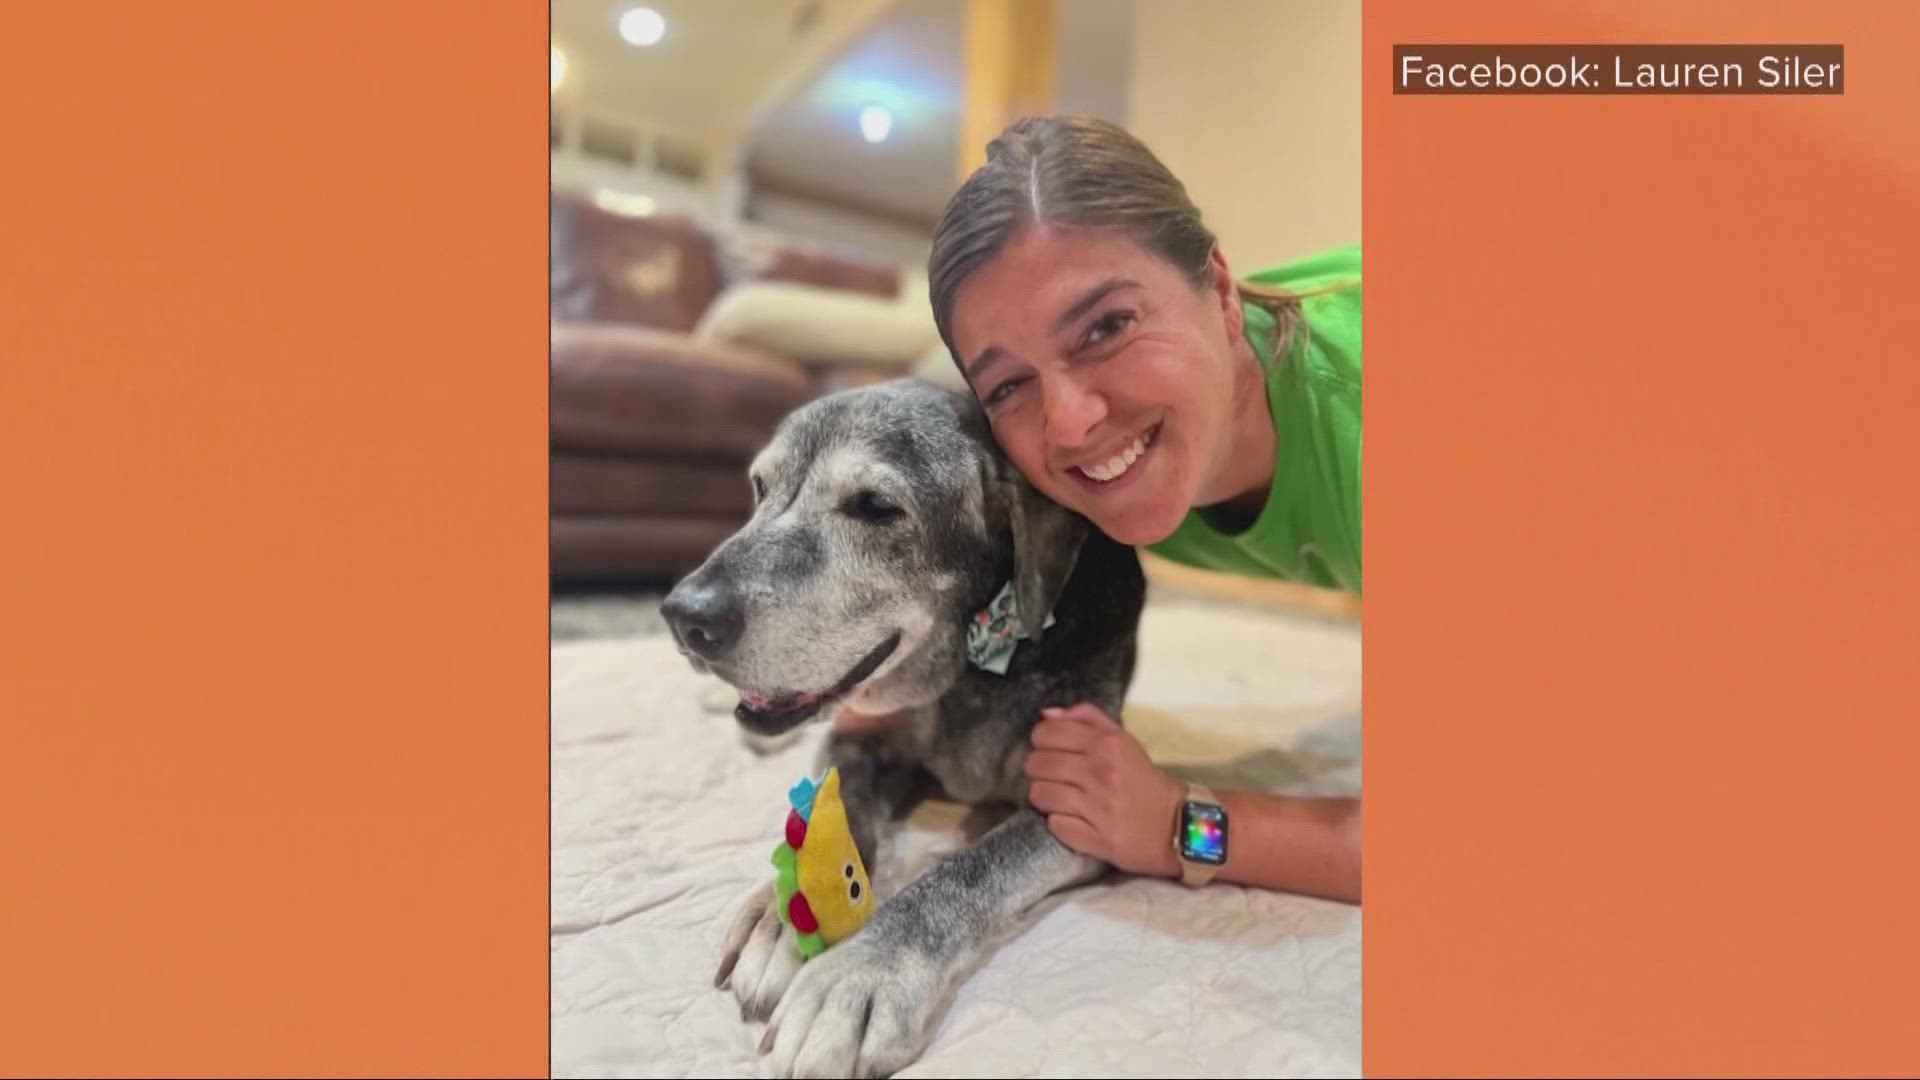 When a 19-year-old dog was surrendered at a Dallas shelter, best friends took her in. Could Annie's tale help other seniors get adopted too?